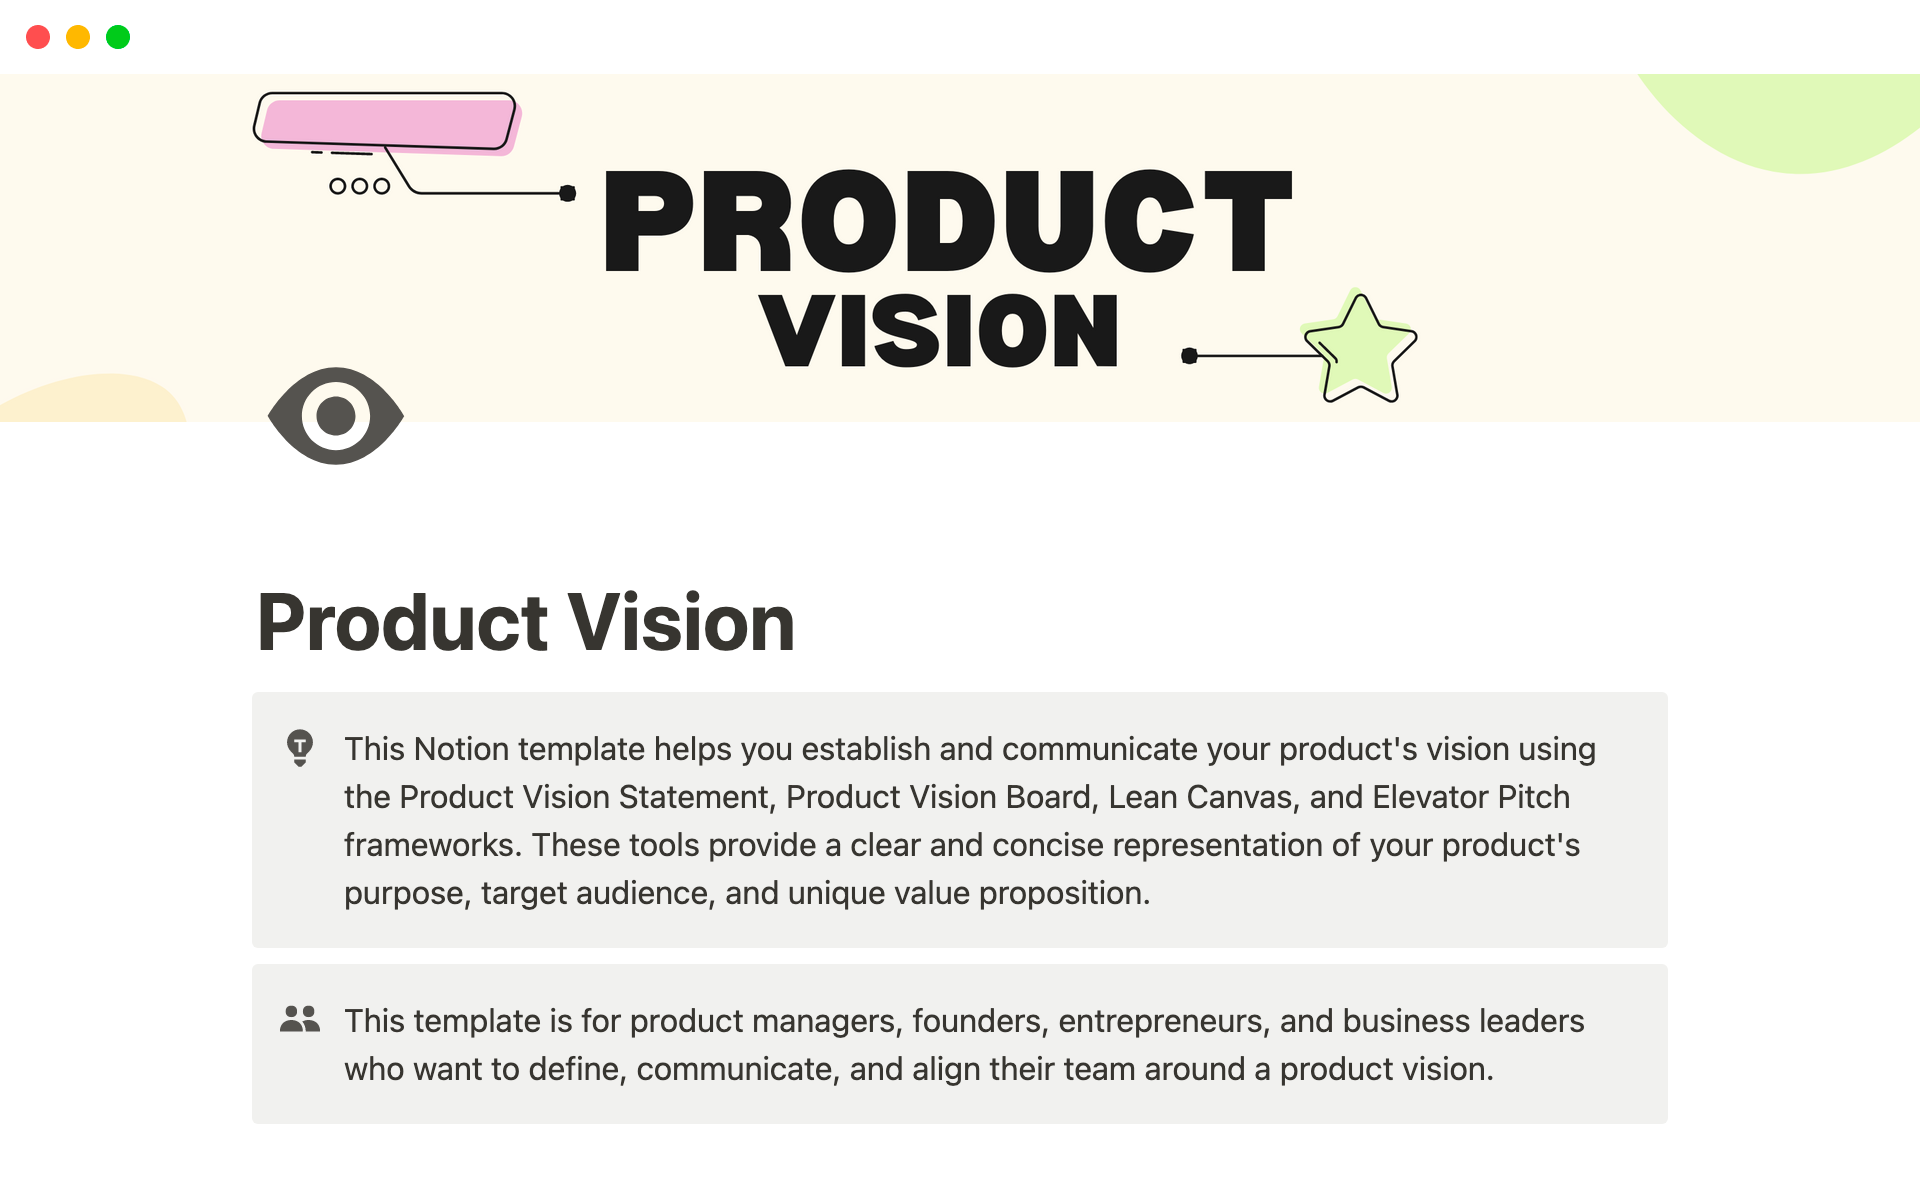 This Notion template helps you establish and communicate your product's vision using the Product Vision Statement, Product Vision Board, Lean Canvas, and Elevator Pitch frameworks.